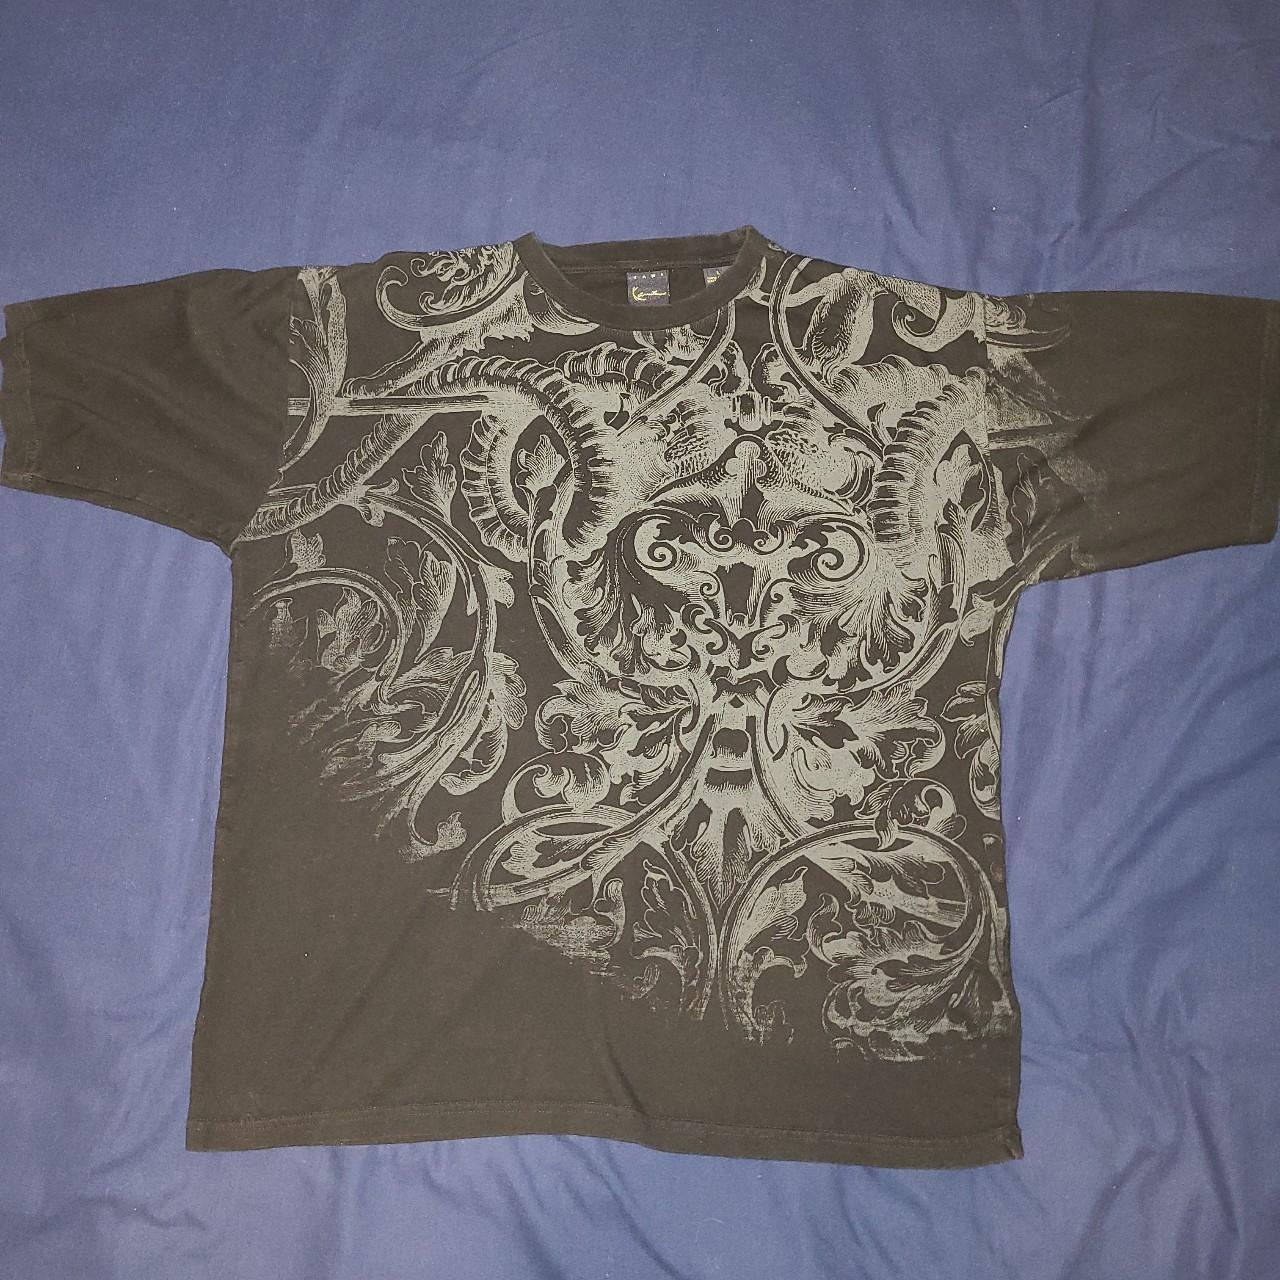 item listed by depop314sales